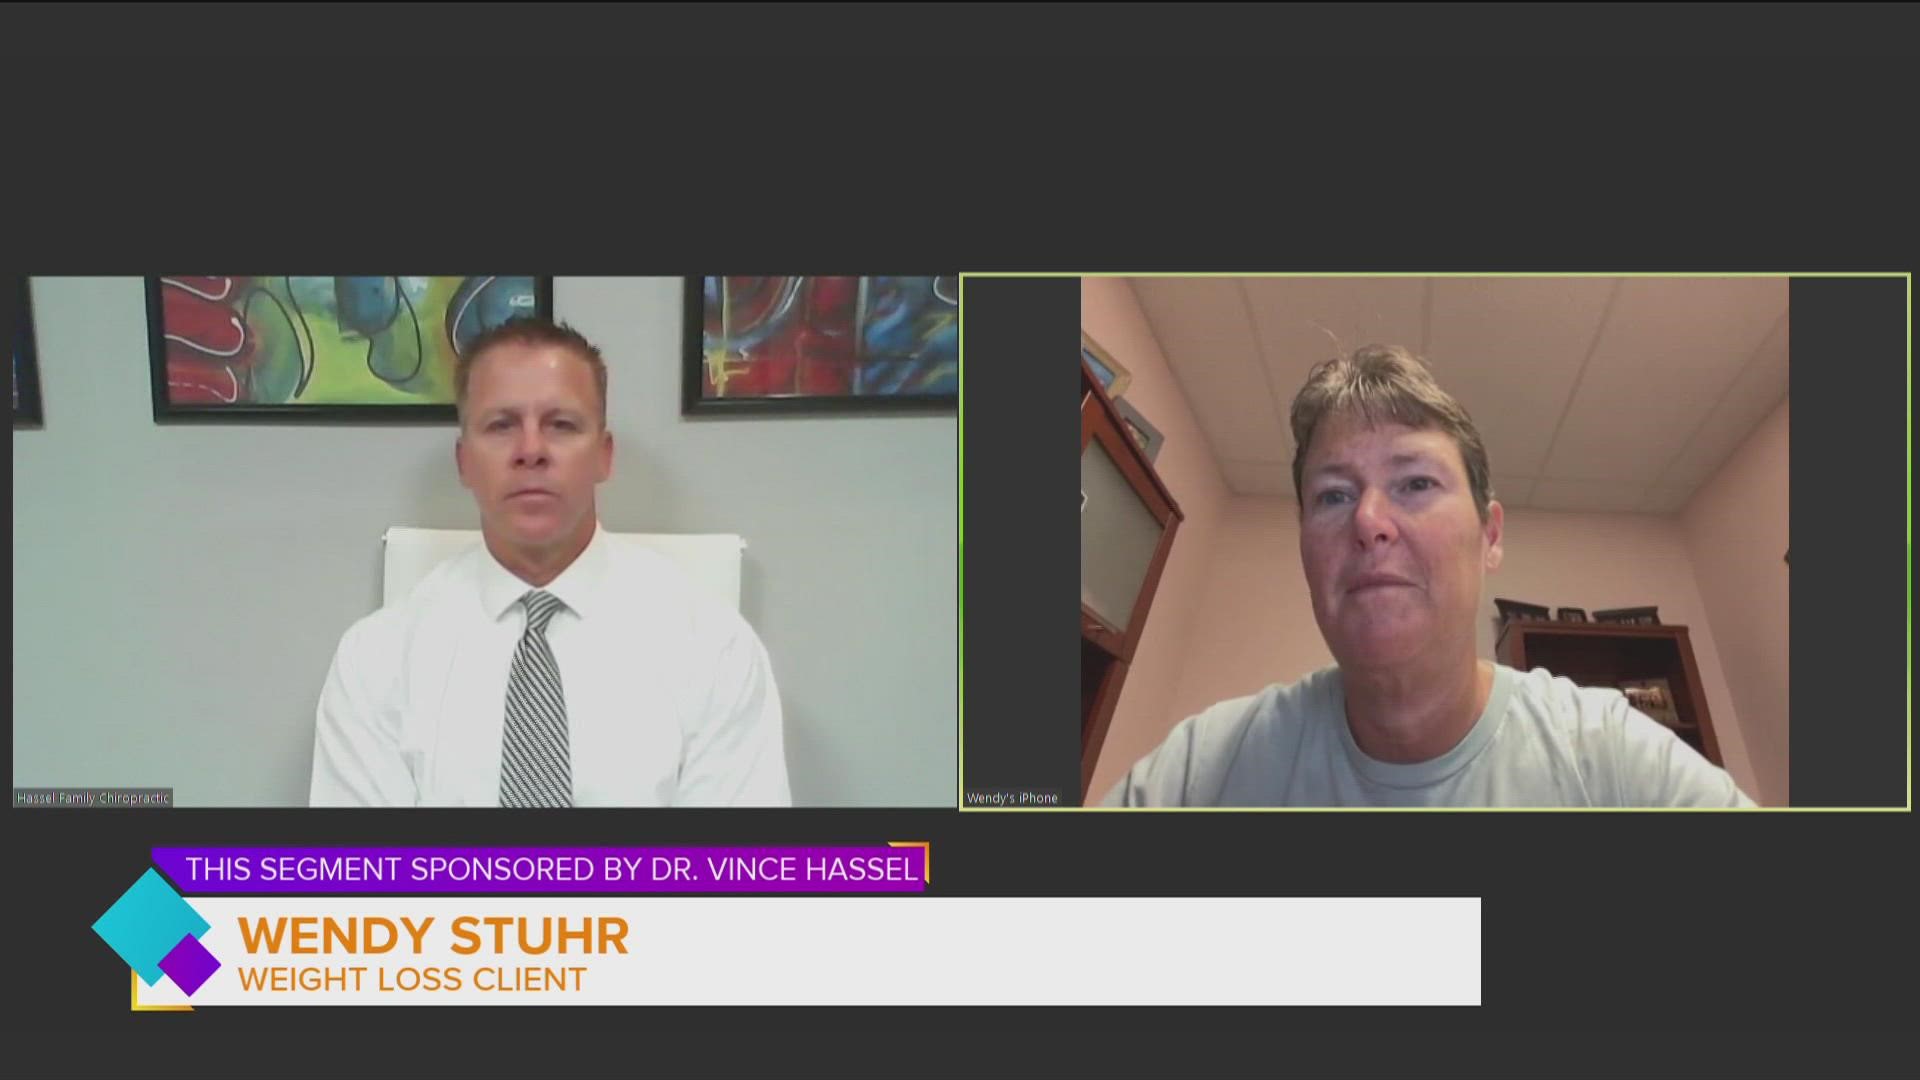 Wendy Stuhr has watched over 30 pounds melt off her body using Dr. Vince Hassel's ChiroThin Weight Loss program and says accountability was key! | Paid Content